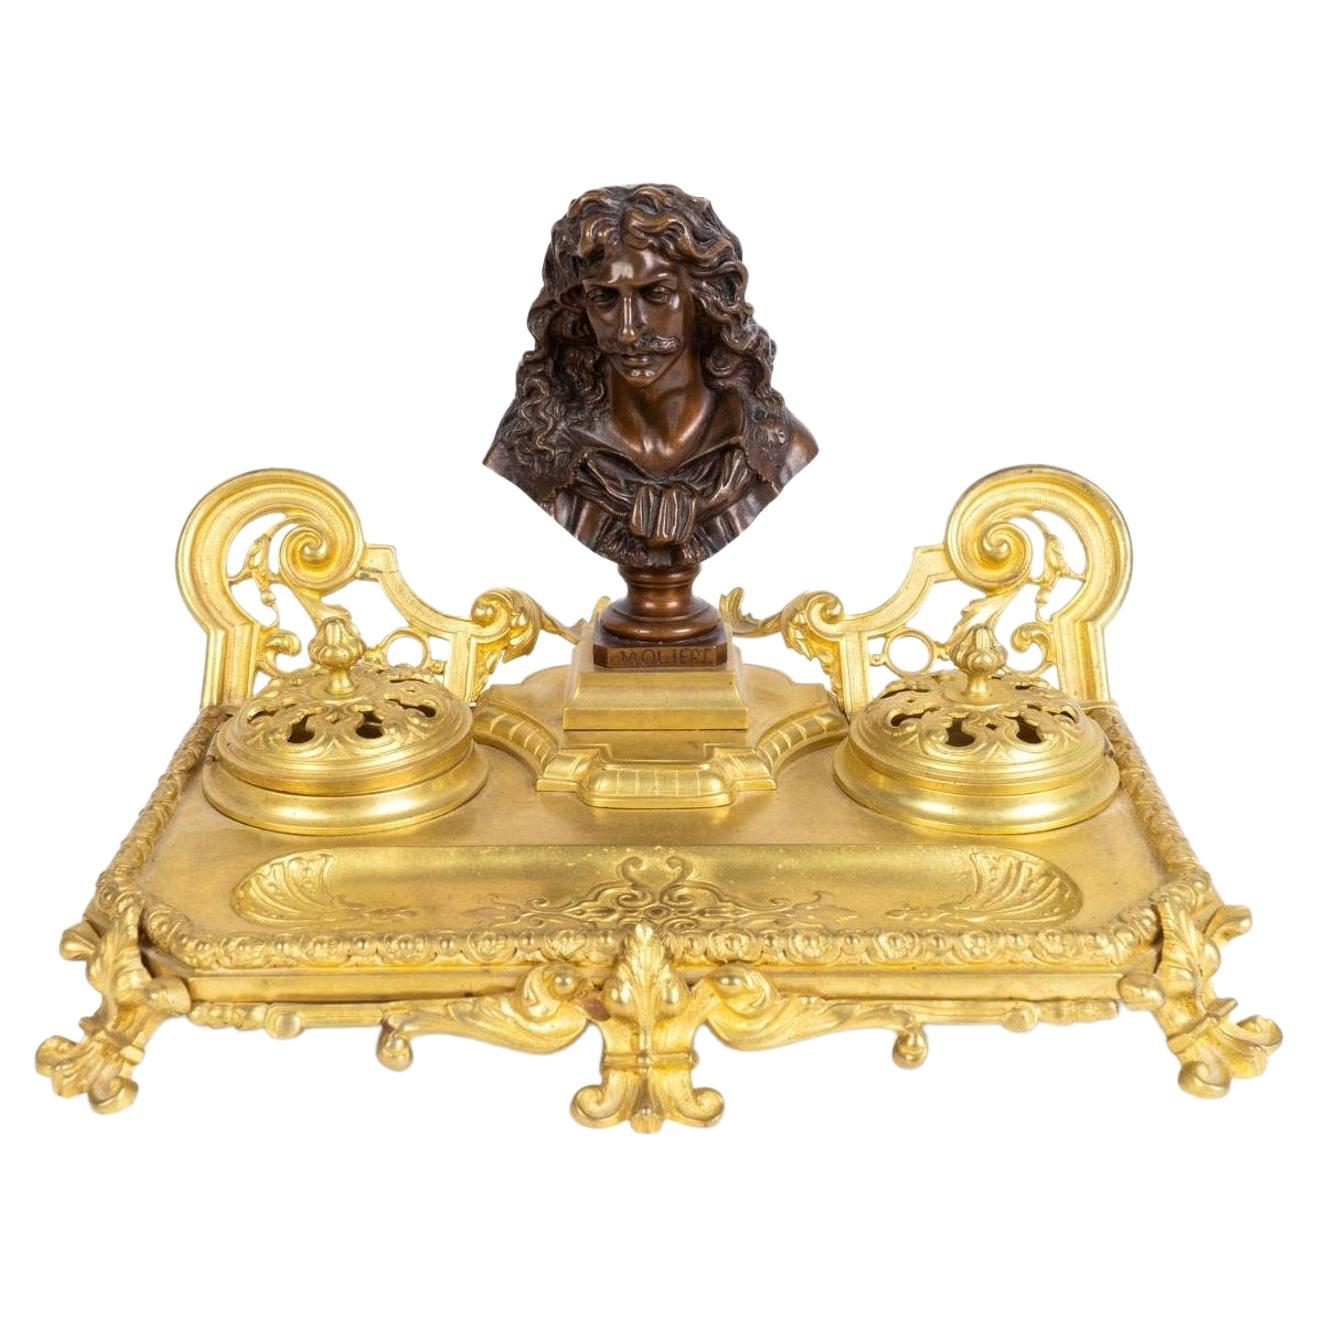 Antique French Gilt Bronze Encrier Inkwell Desk Stand, Signed JF For Sale